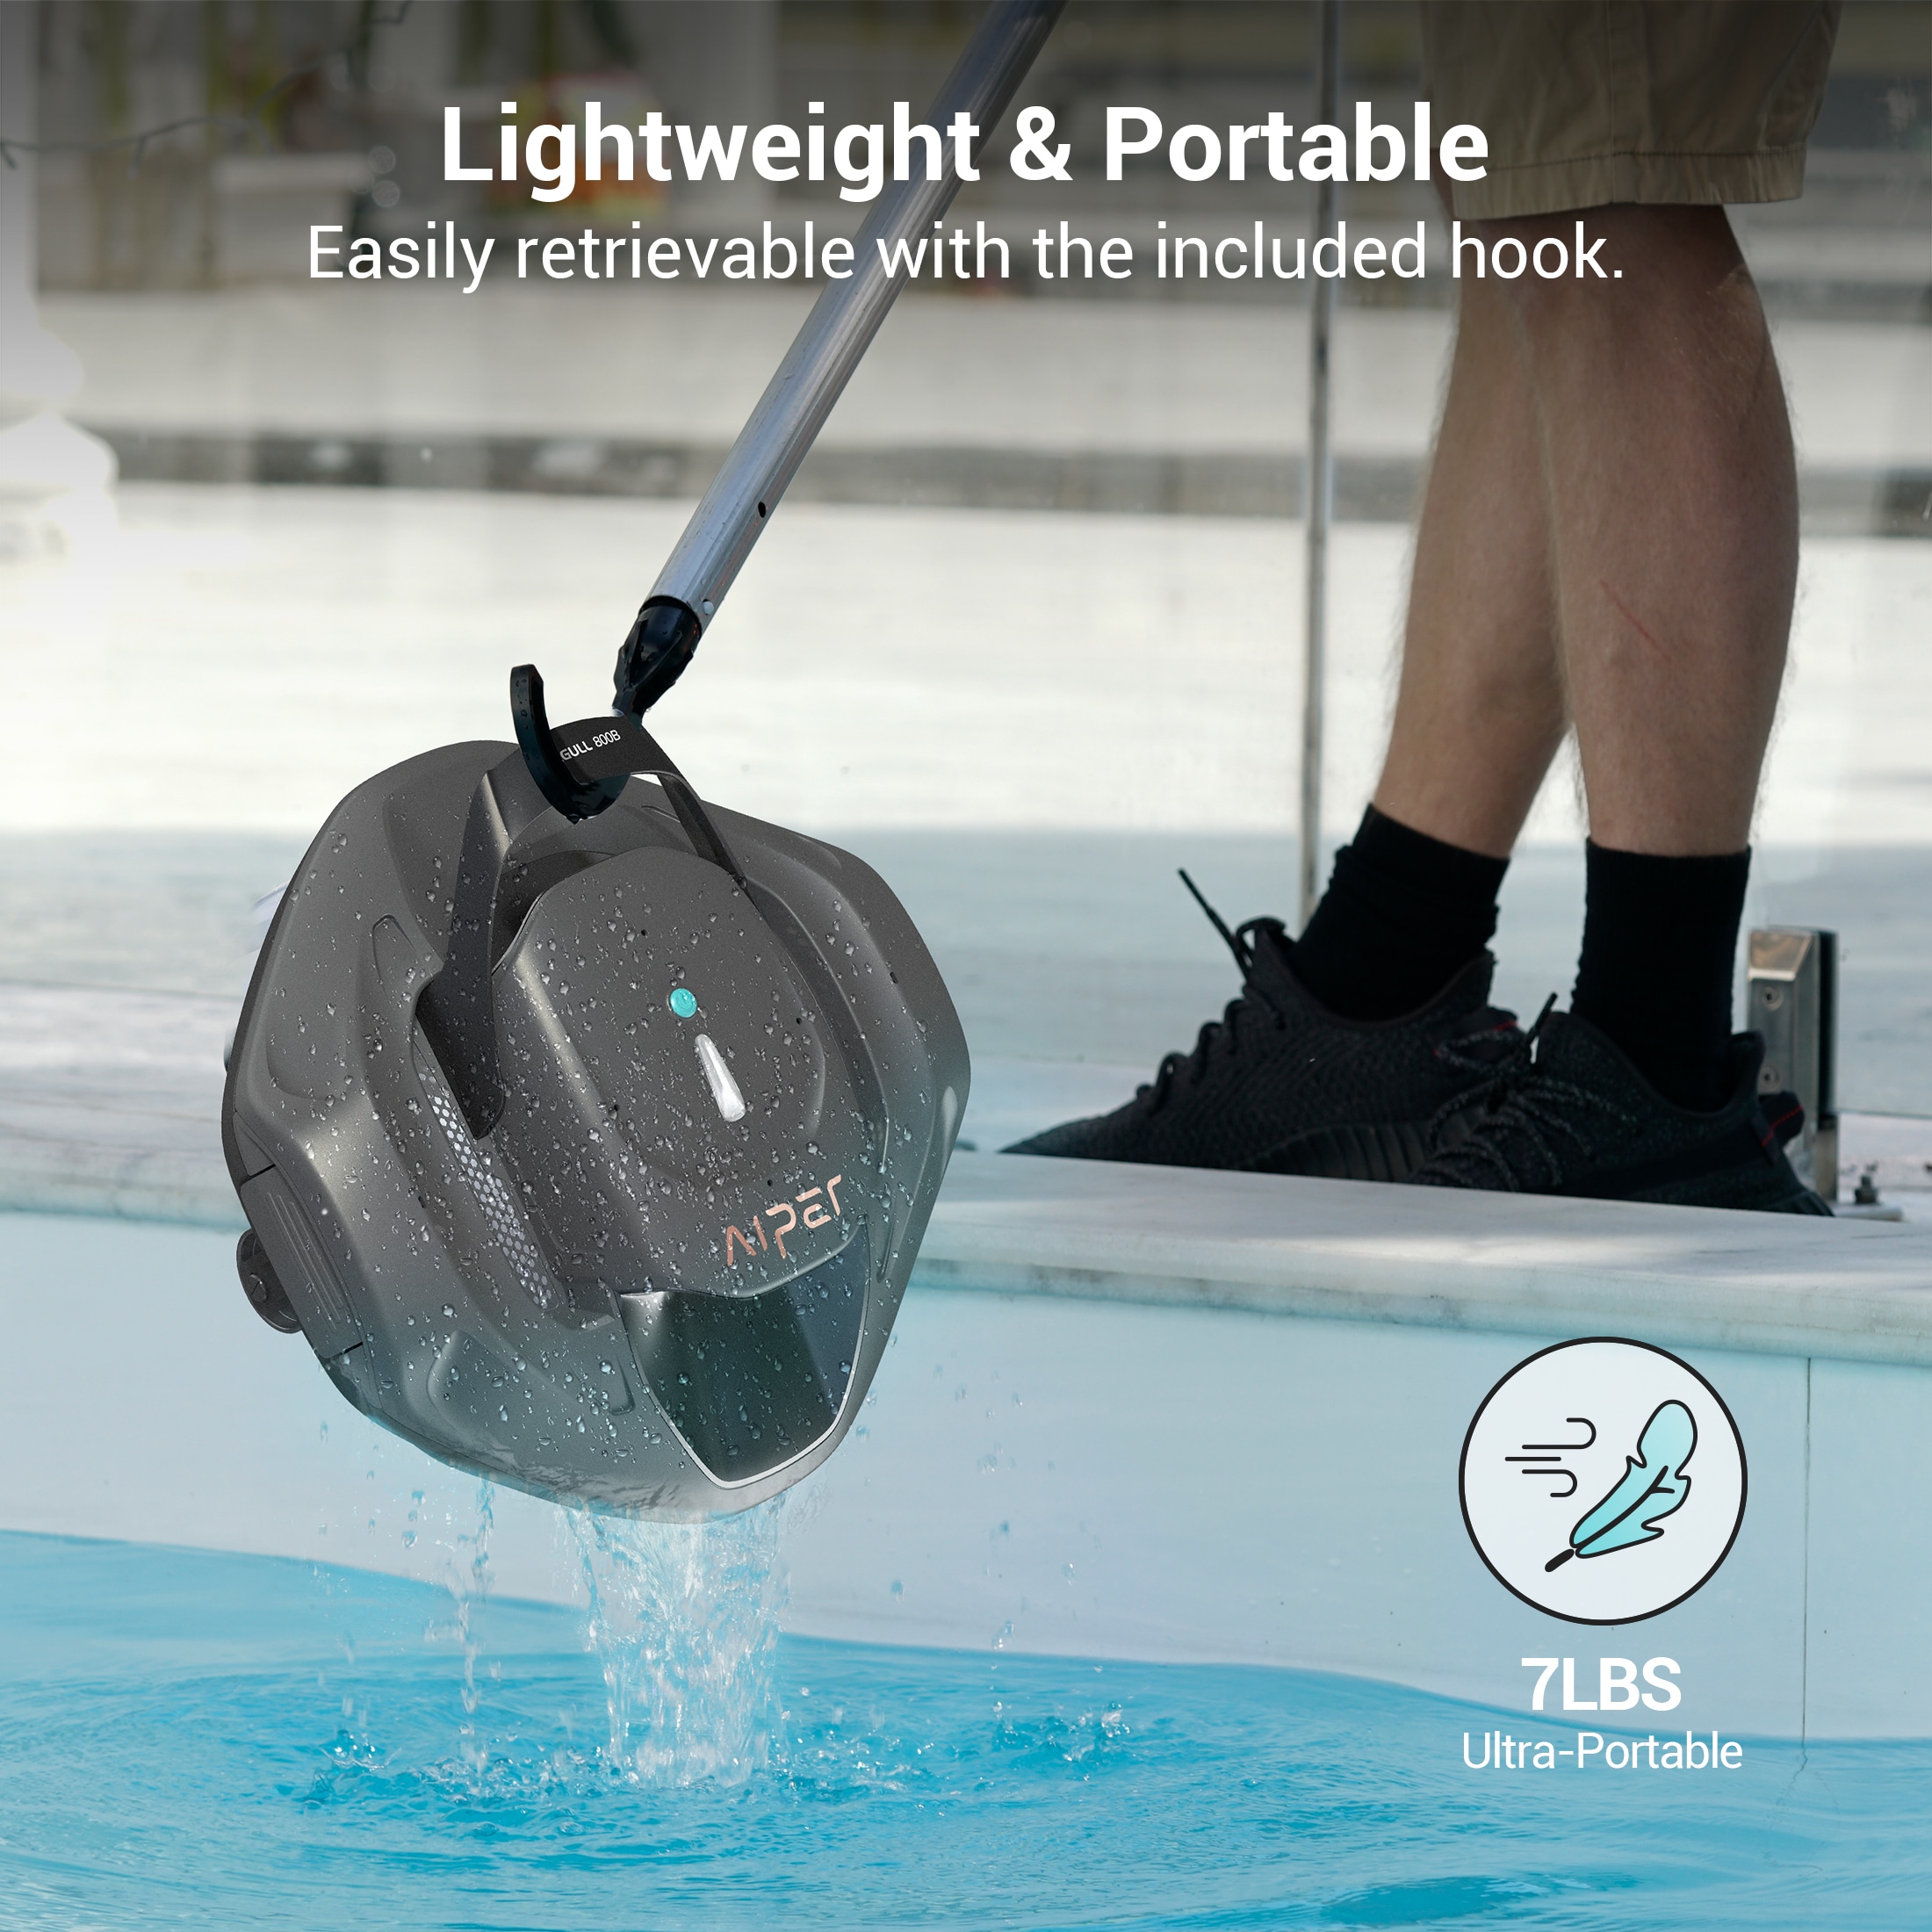 Aiper Aiper Seagull 800B Cordless Robotic Pool Cleaner in the Pool ...